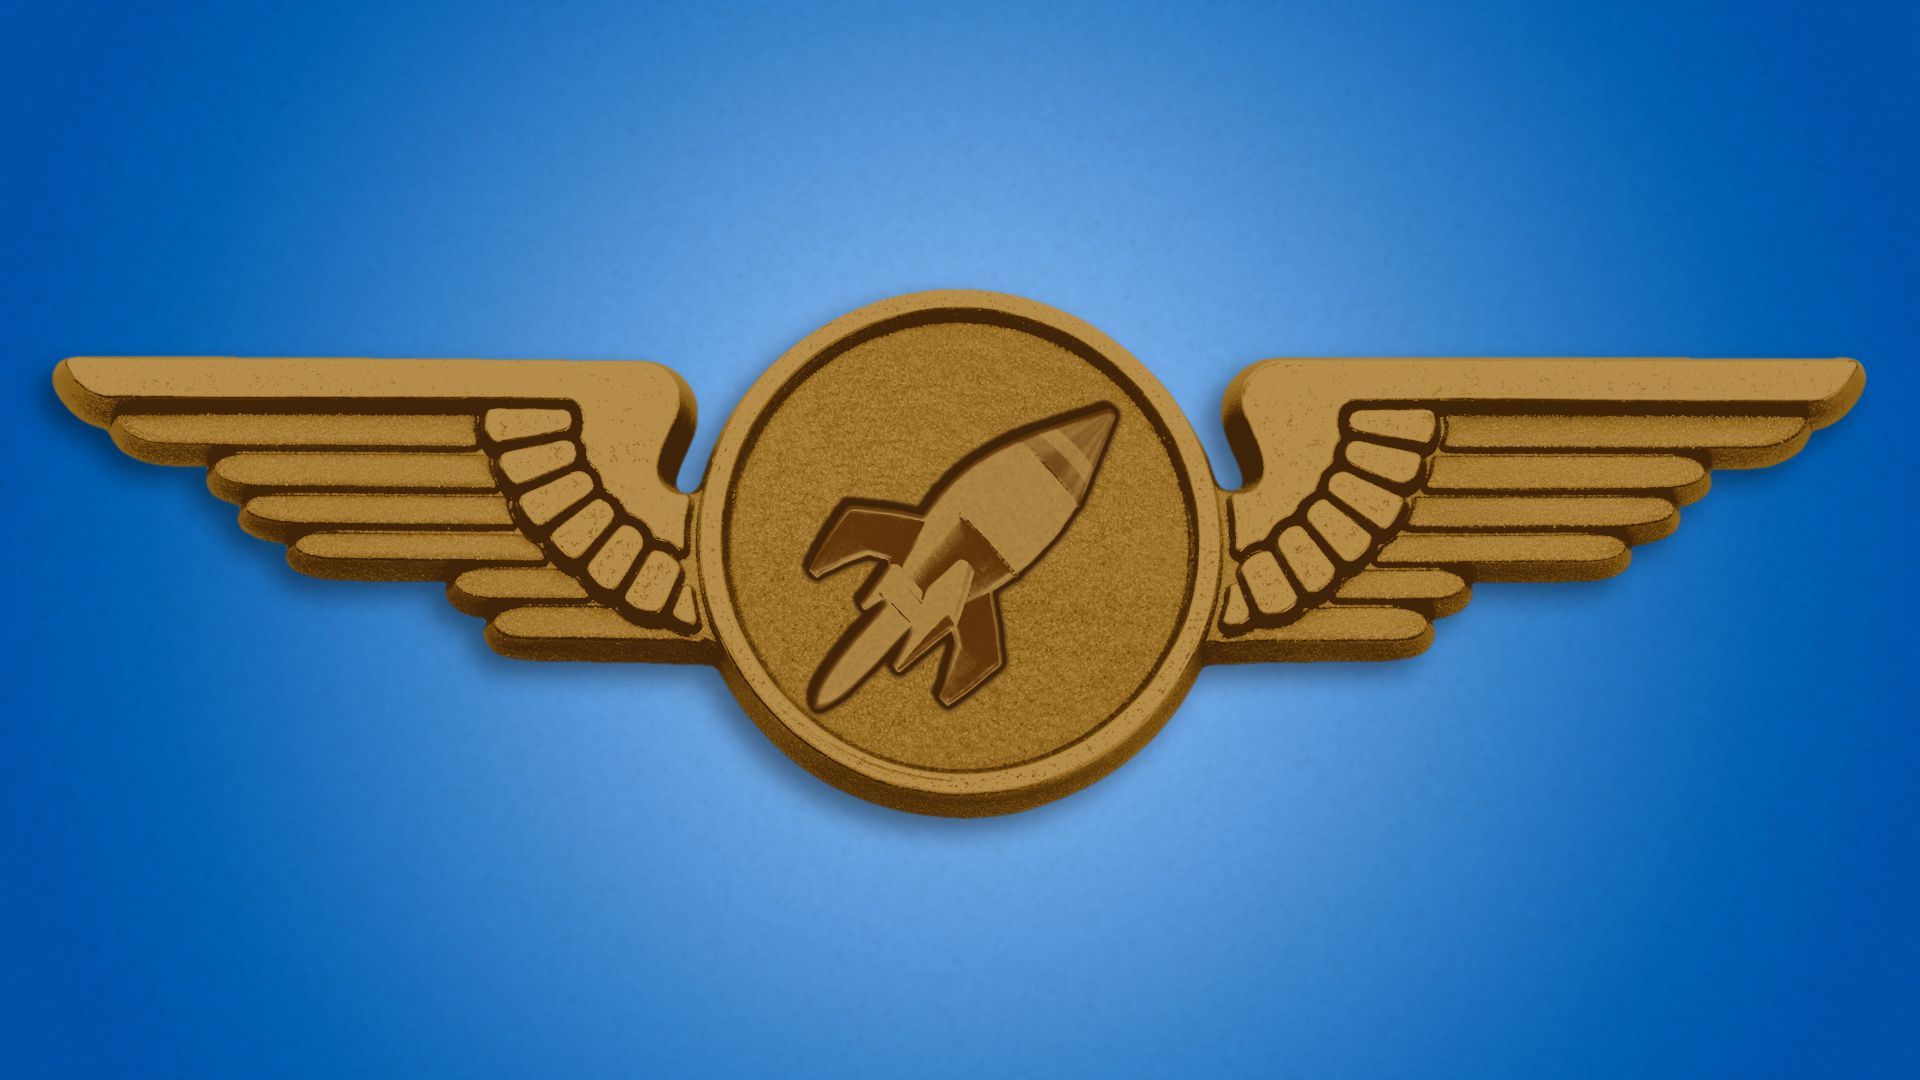 Emblem of wings with a rocket ship in the center.